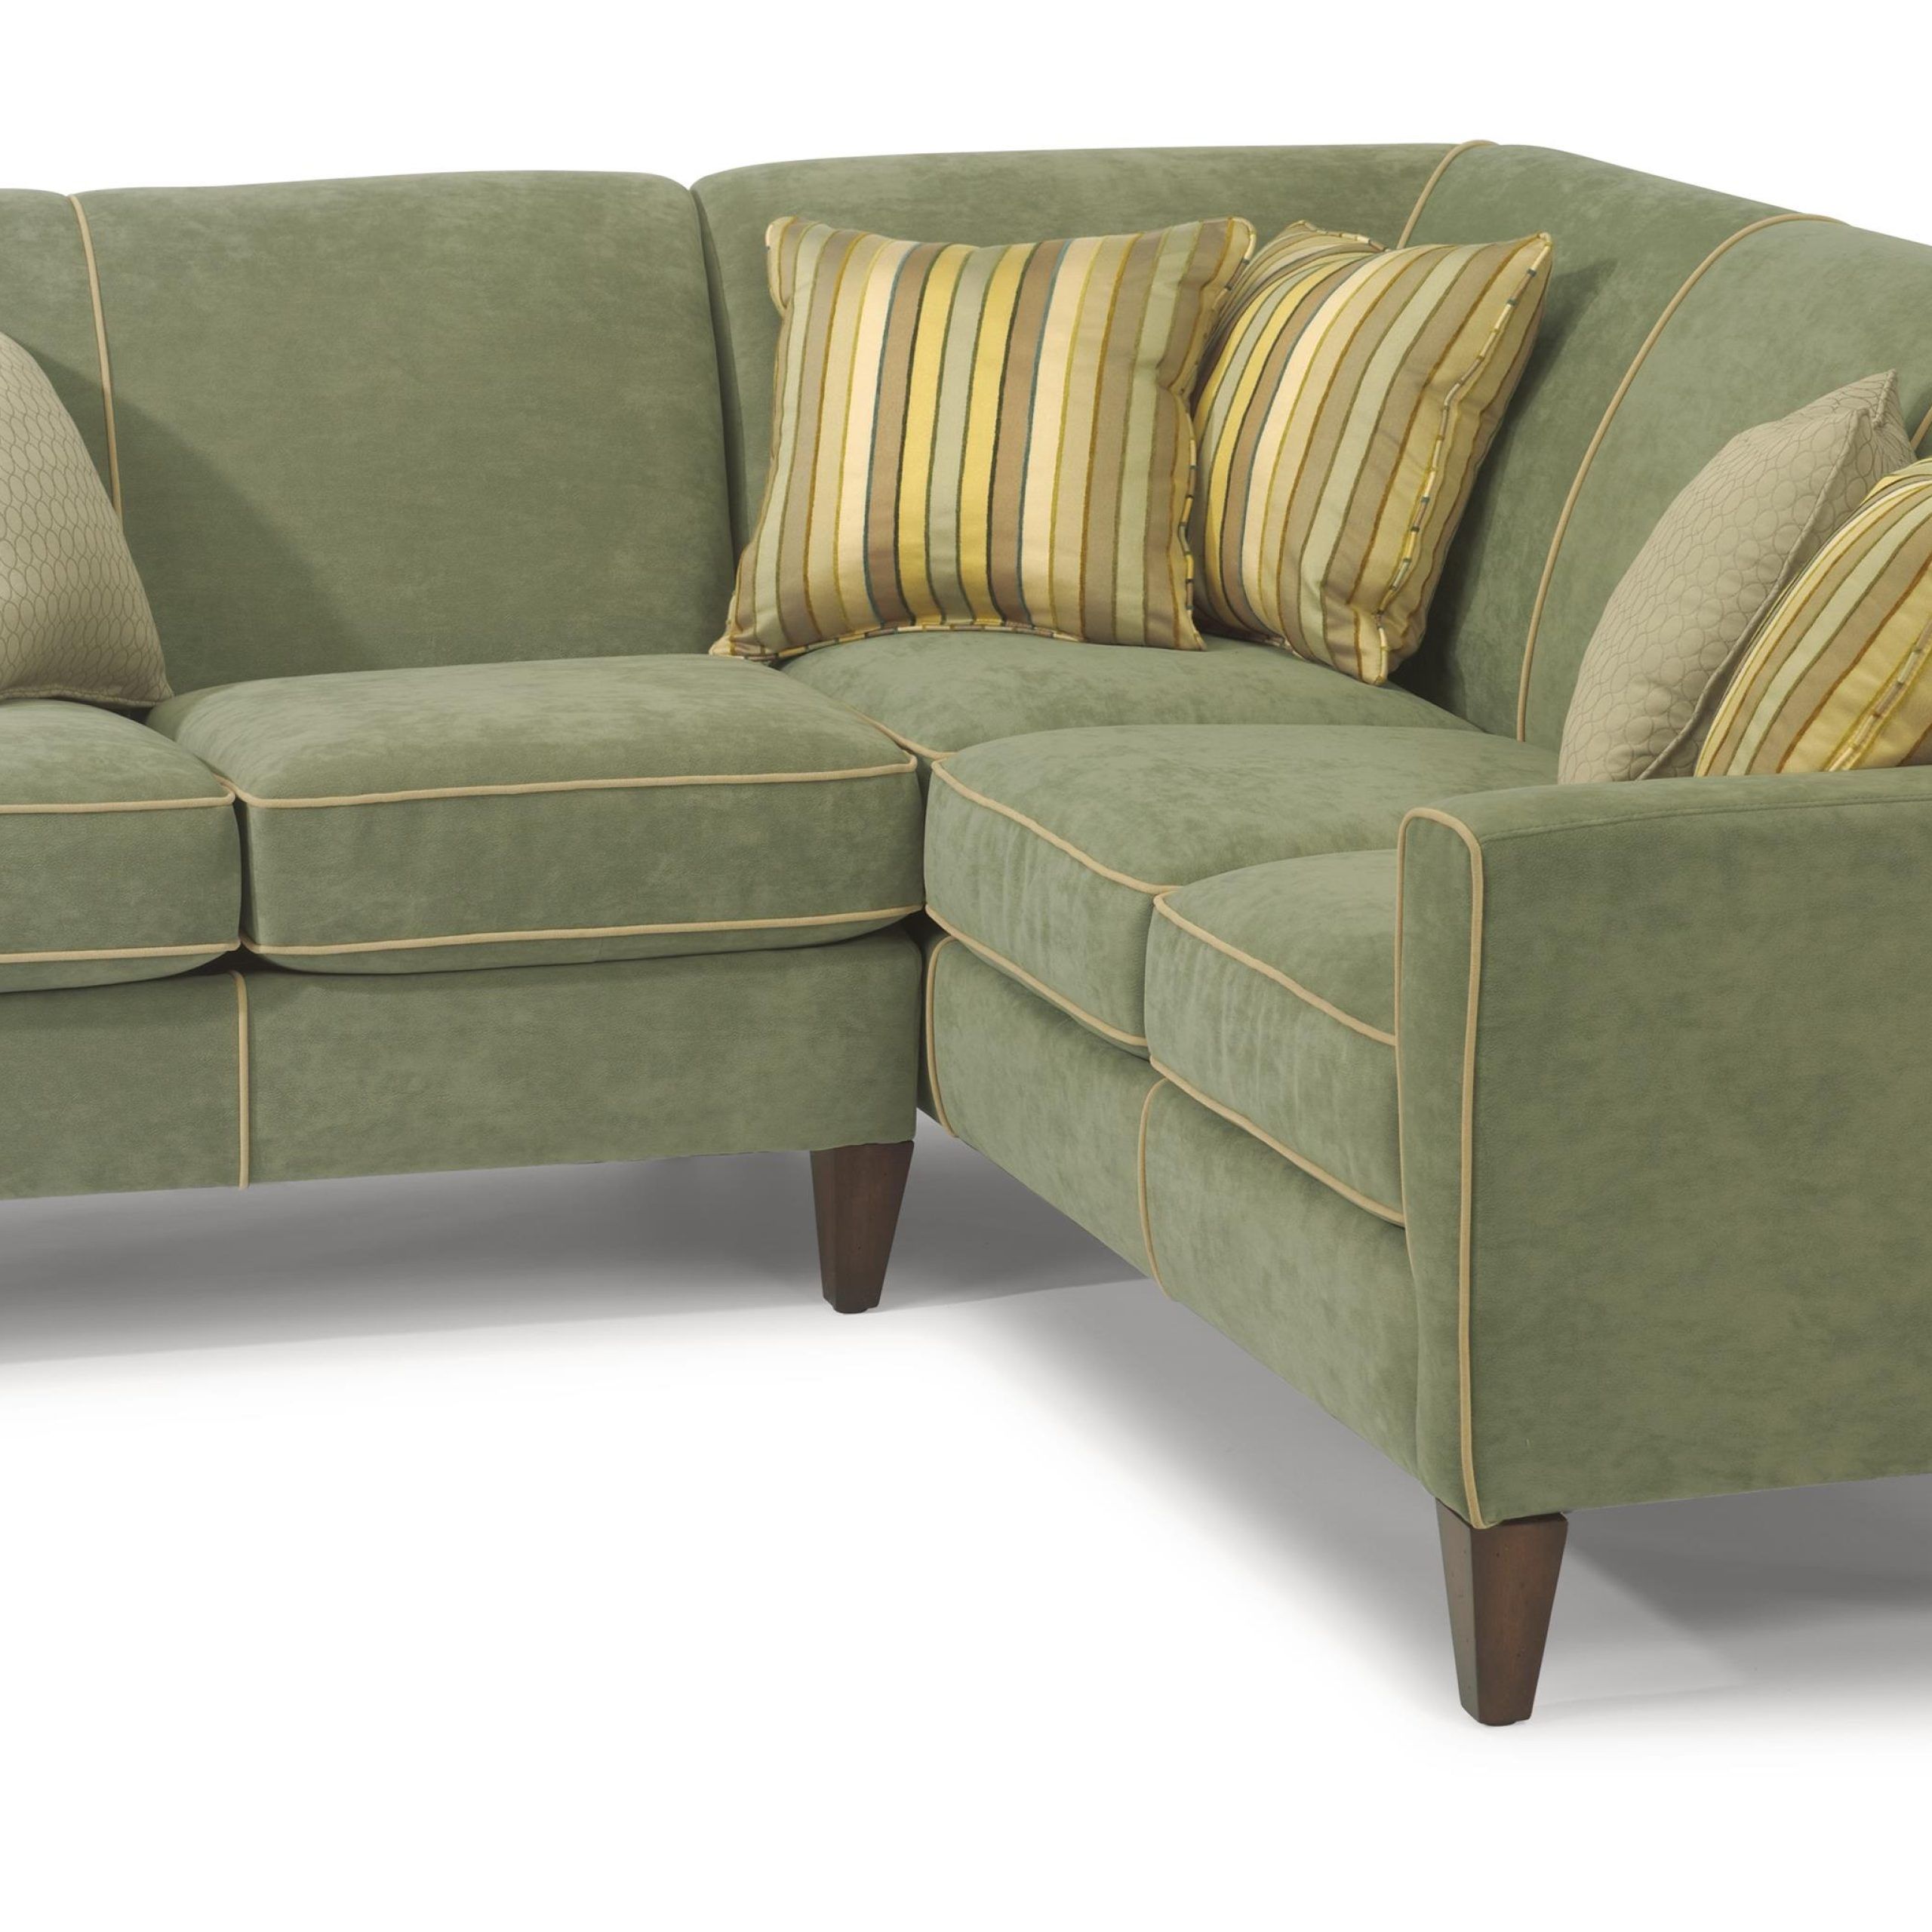 Flexsteel Digby 3966 28x1+3966 33x1 430 24 Contemporary L Shape In Modern L Shaped Sofa Sectionals (Gallery 7 of 20)